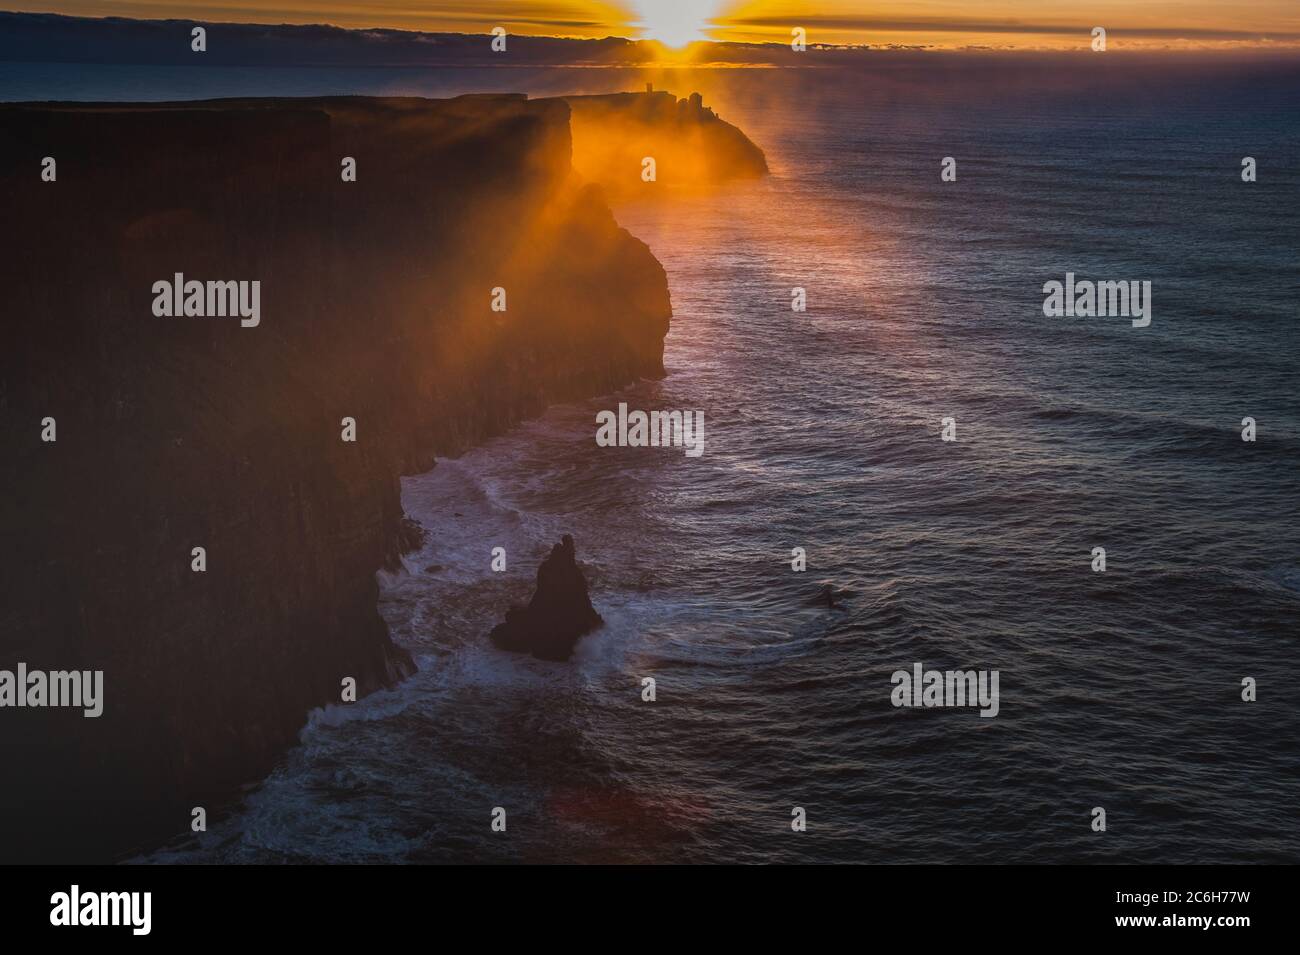 Sun sets on the Cliffs of Moher while mist rises from the Atlantic Ocean. Misty or foggy sunset over dramatic cliffs as sun rays peep through the haze Stock Photo